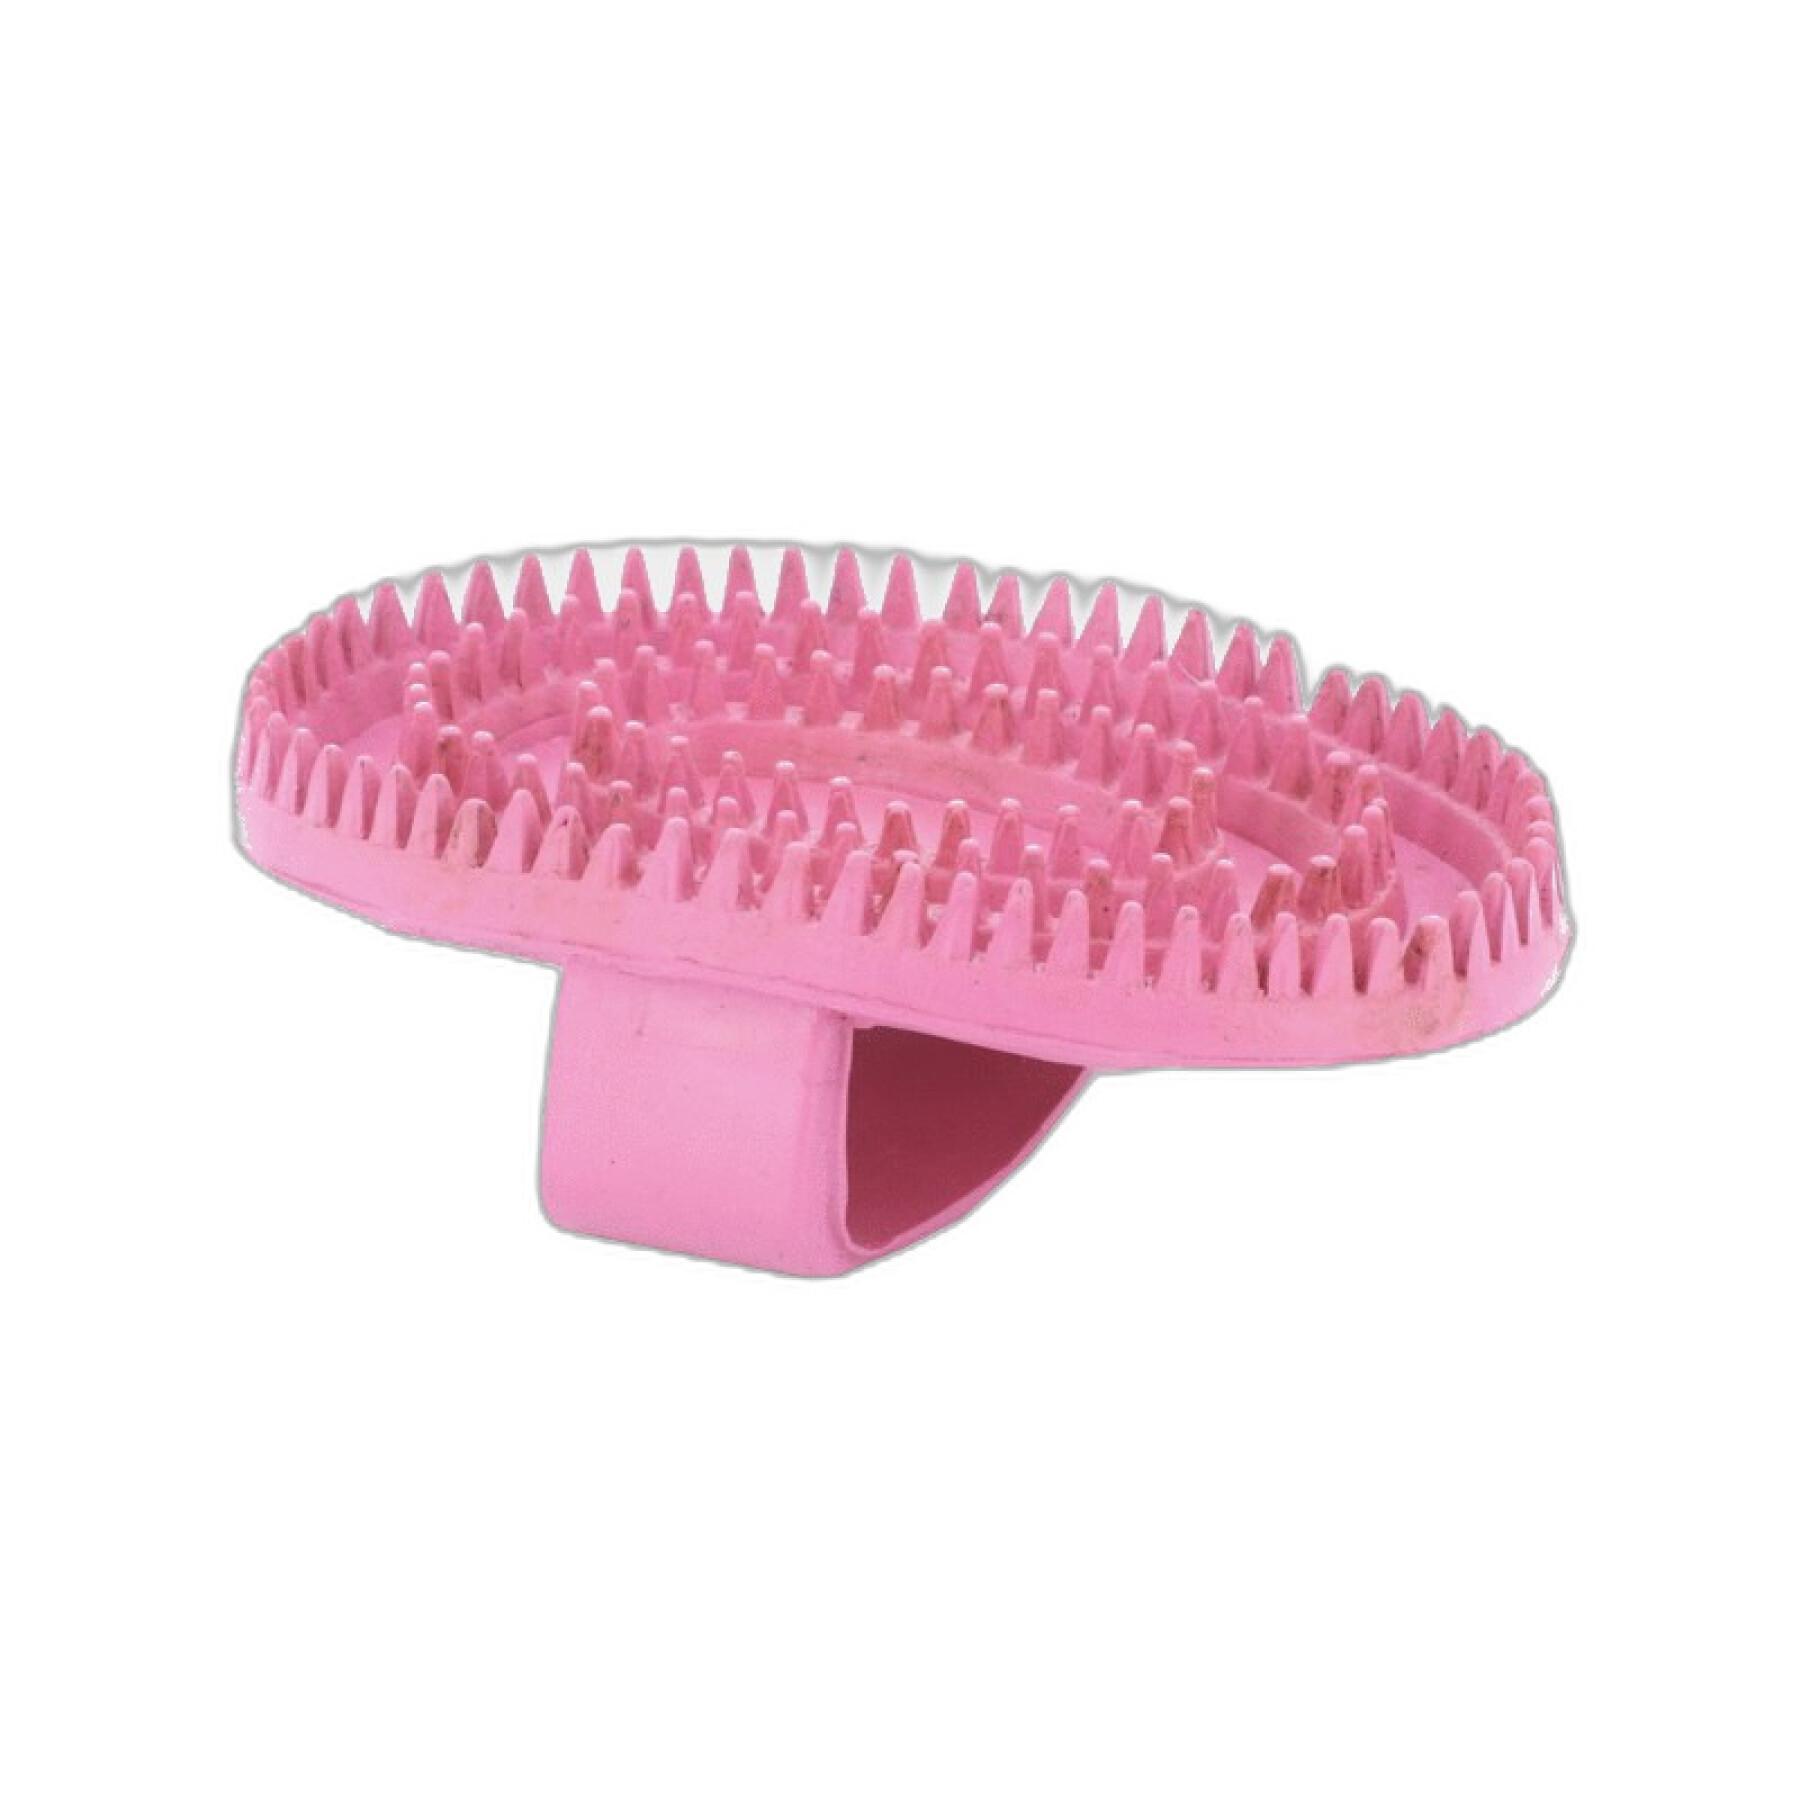 Hippotonic Rubber Curry Comb